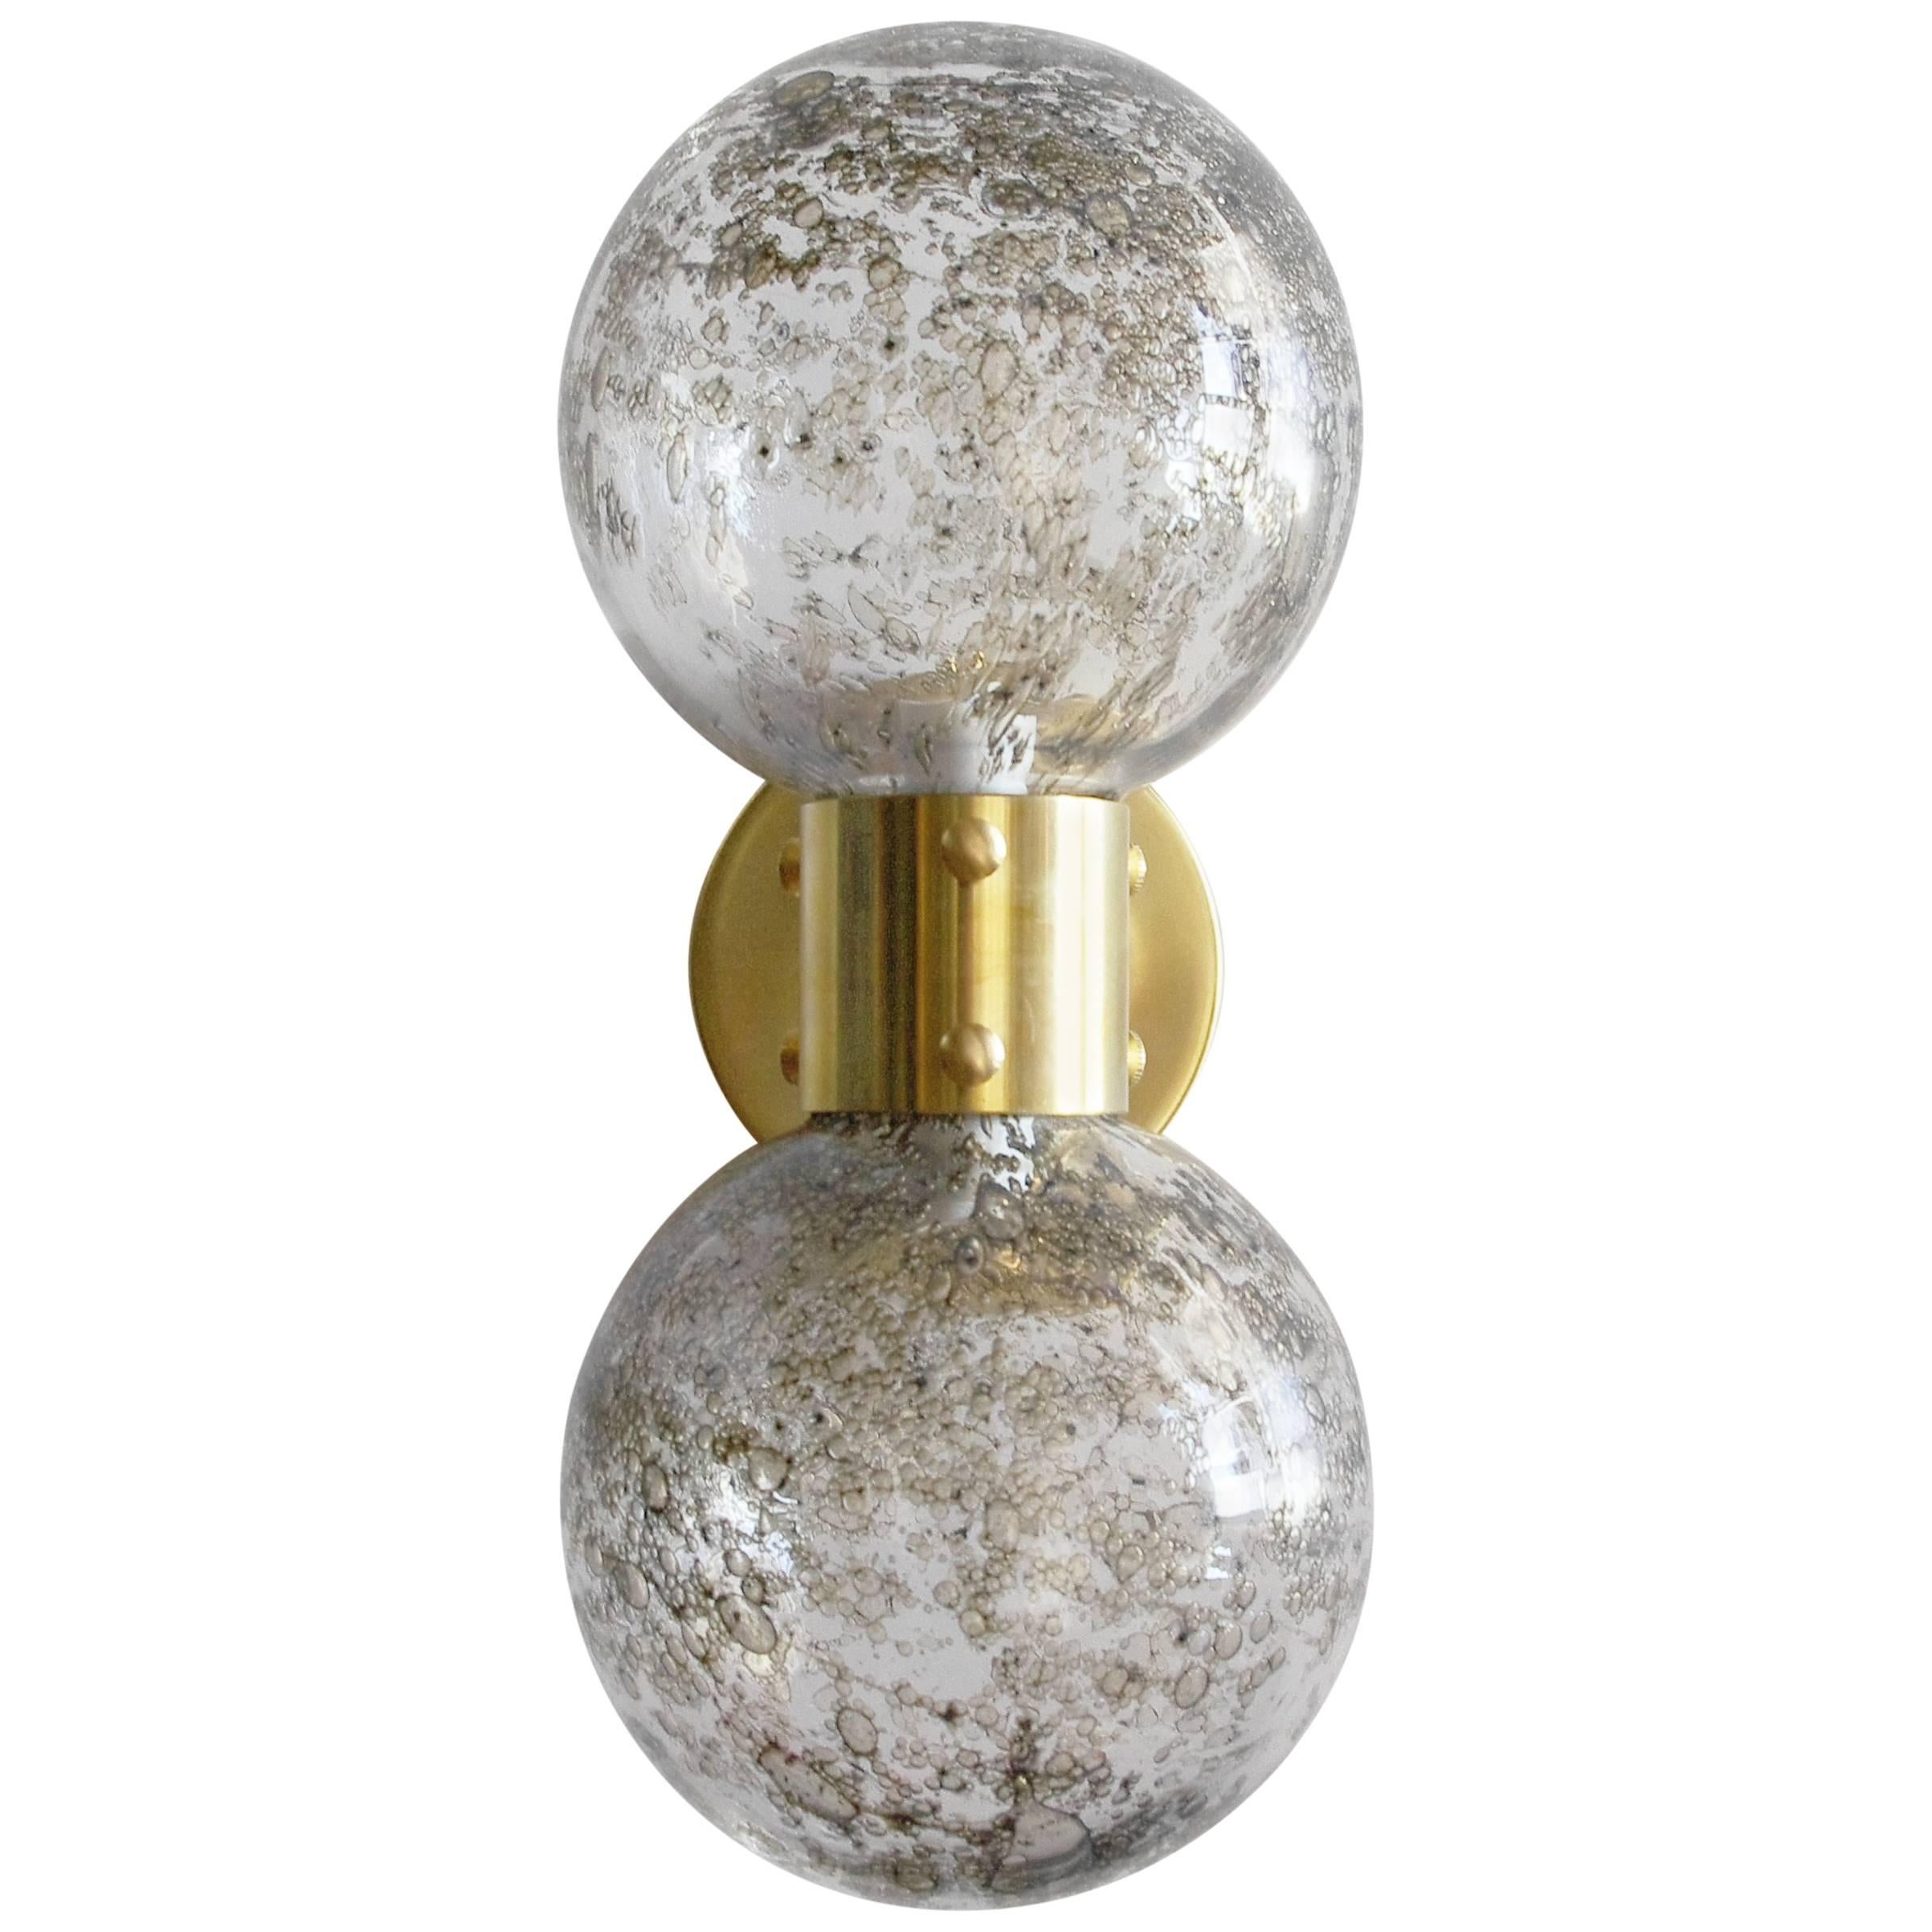 Limited edition Italian wall lights with vintage clear Murano glass globes with smoky bubbles within the glass, mounted on polished brass frames / Designed by Fabio Bergomi for Fabio Ltd / Made in Italy
2 lights / E12 or E14 type / max 40W